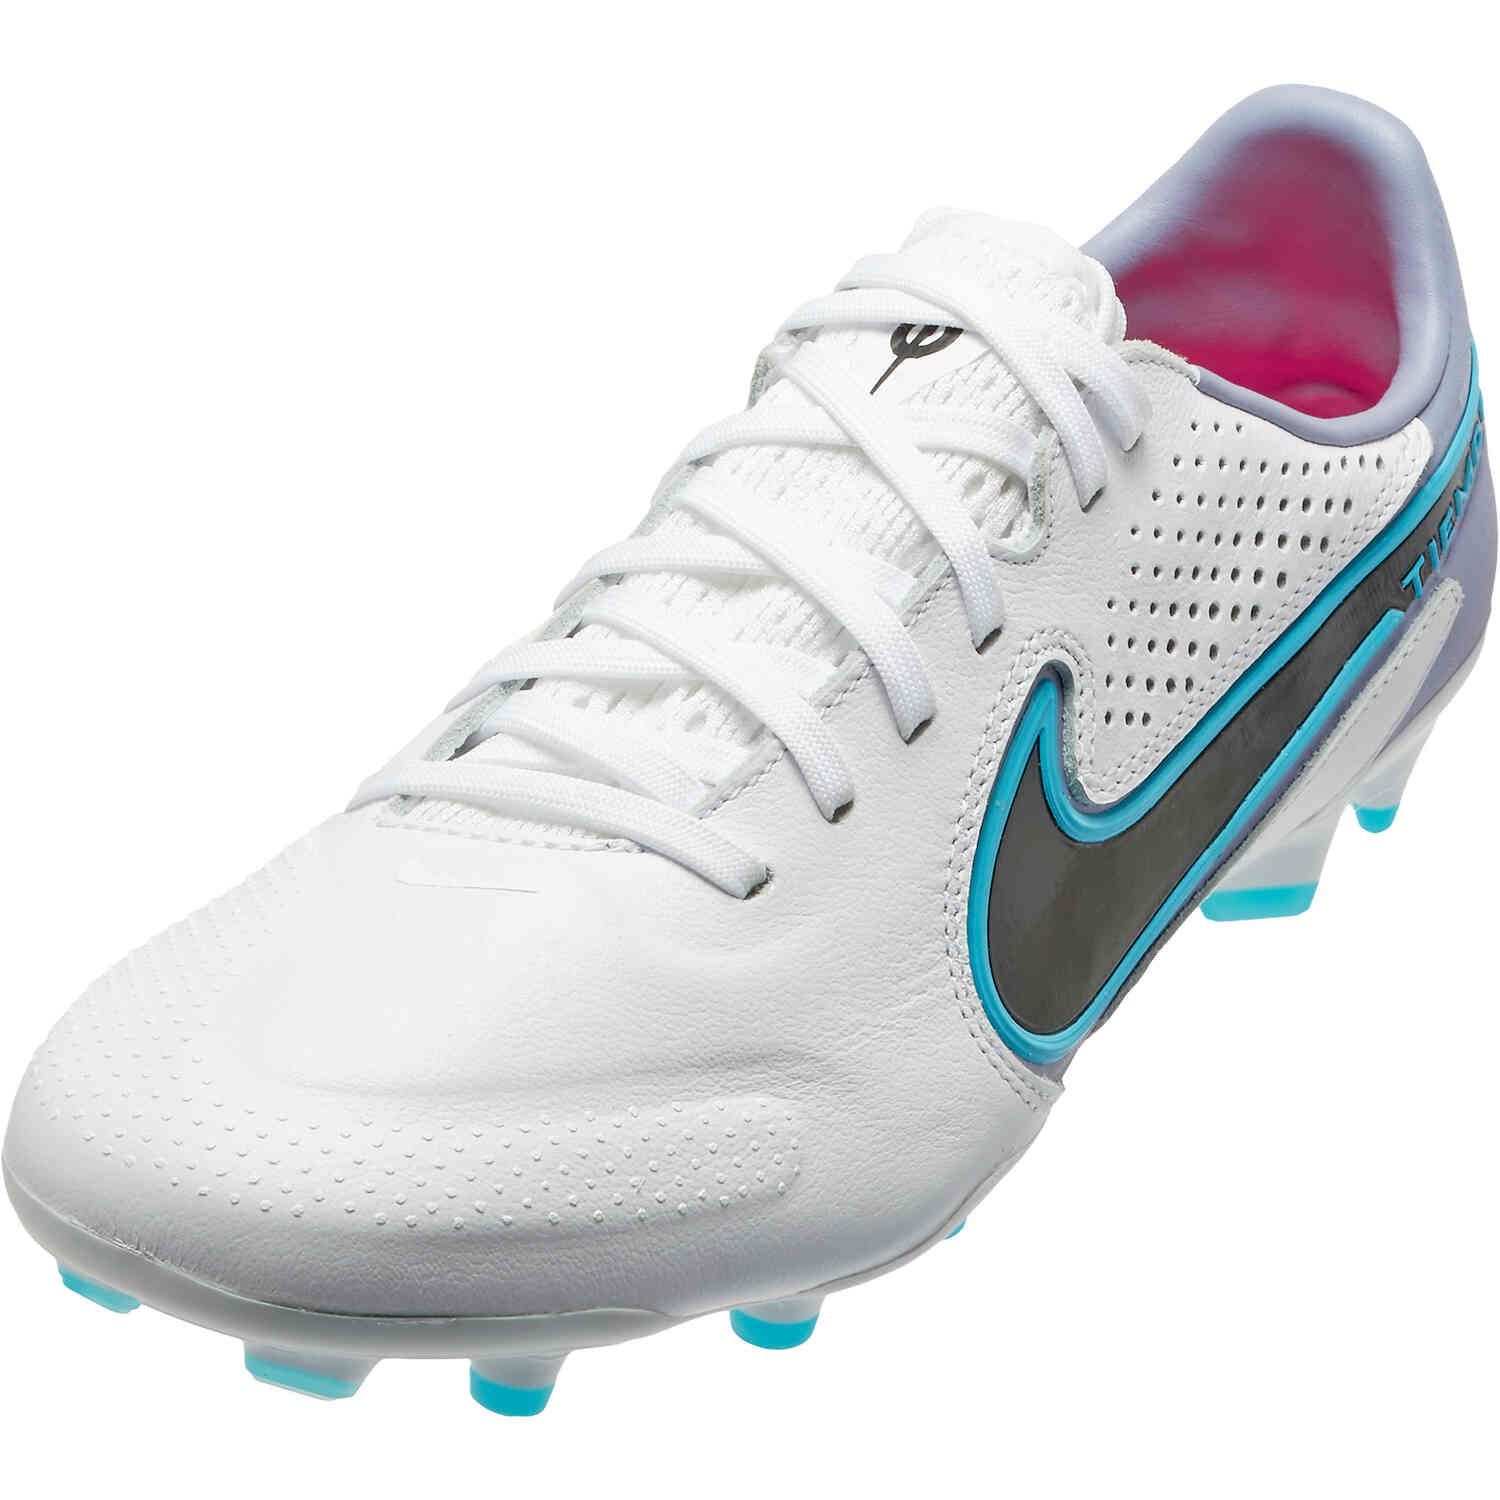 Nike Tiempo Legend Pro FG Firm Ground Soccer Cleats White, Black ...